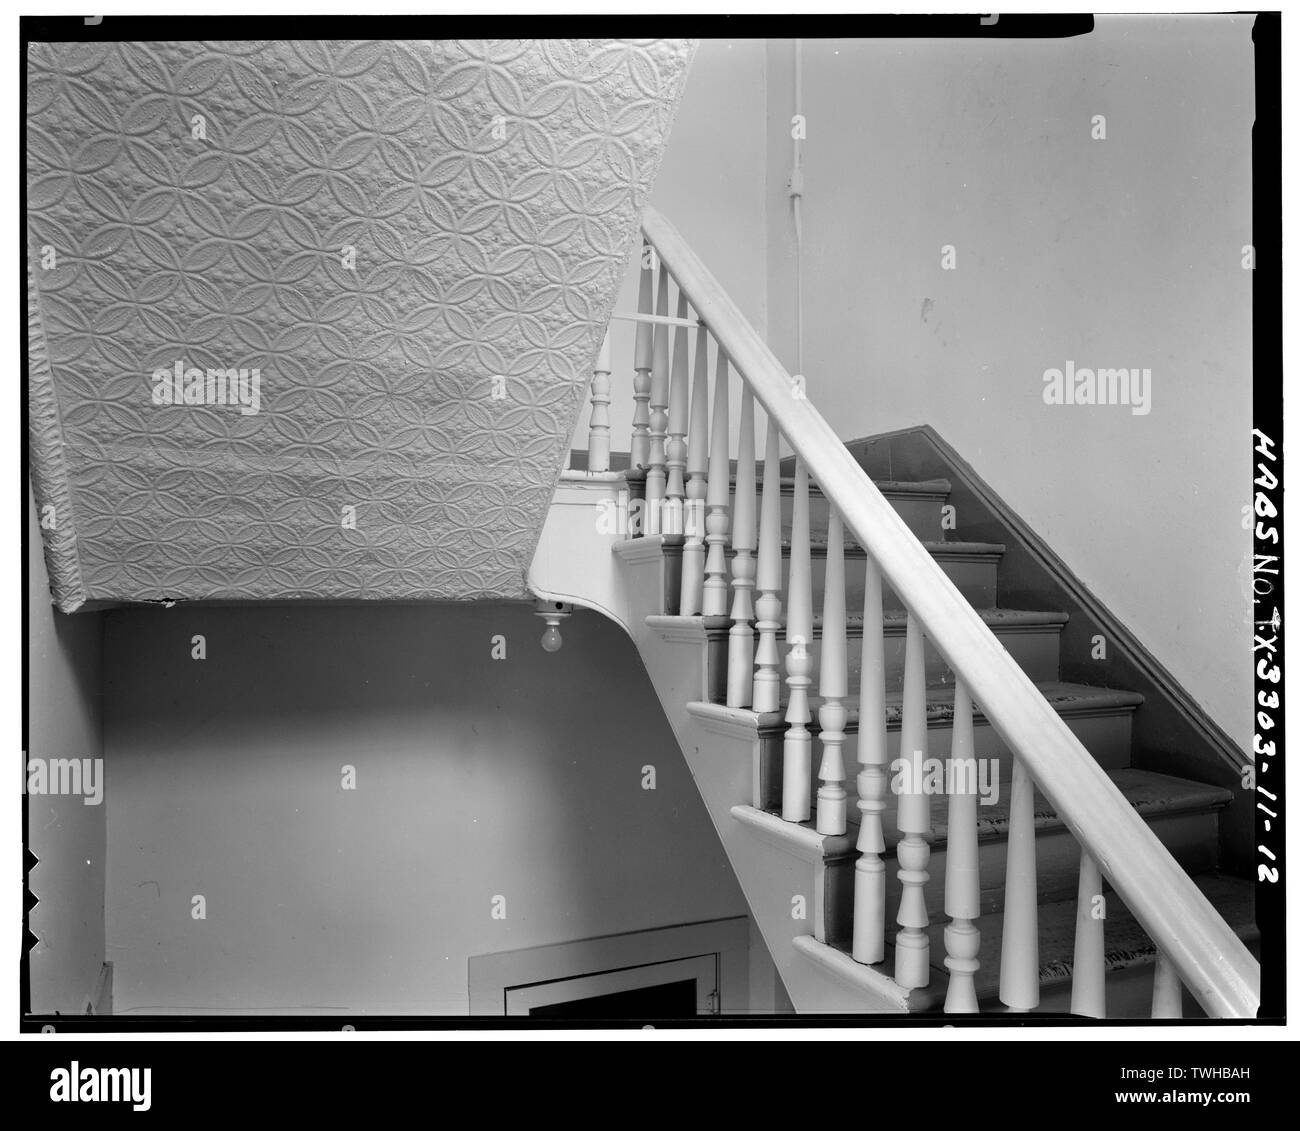 SALLYPORT (BUILDING -613), SECOND FLOOR, DETAIL OF STAIRWAY, SOUTHWEST CORNER OF BUILDING - Fort Sam Houston, Military Post of San Antonio, Company Barracks and Band Building, 603-610 and 613 Infantry Post Road, San Antonio, Bexar County, TX; Cary, Brian, transmitter Stock Photo